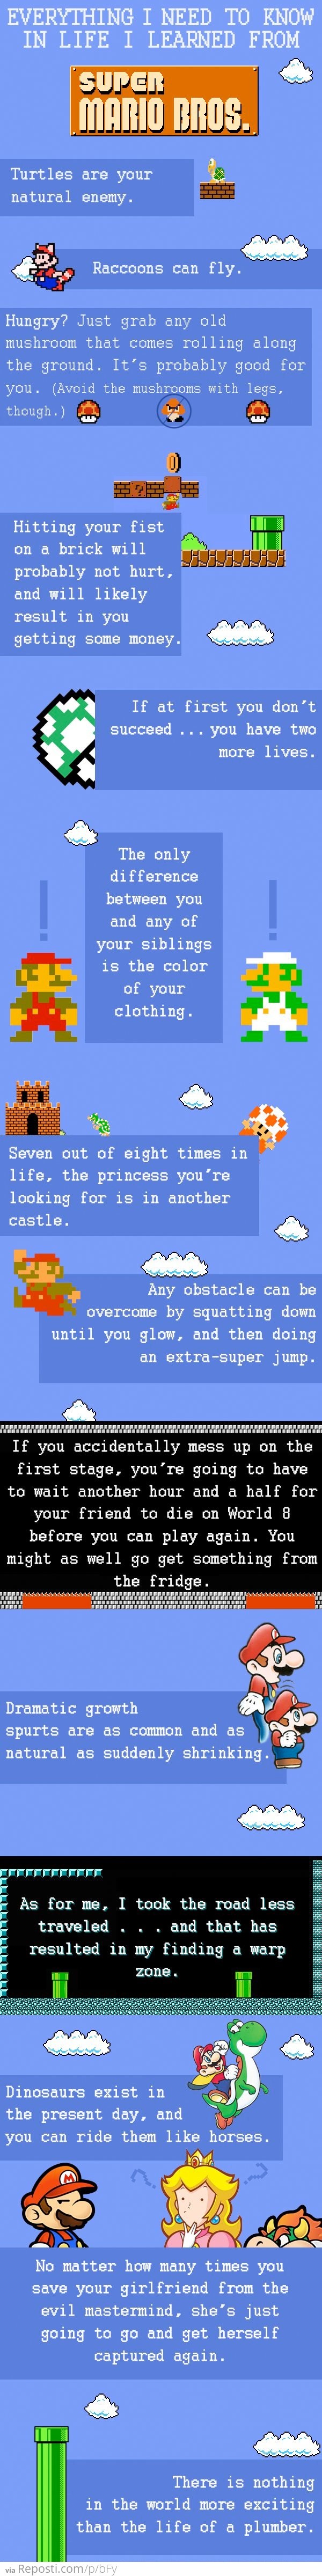 What I've Learned From Mario